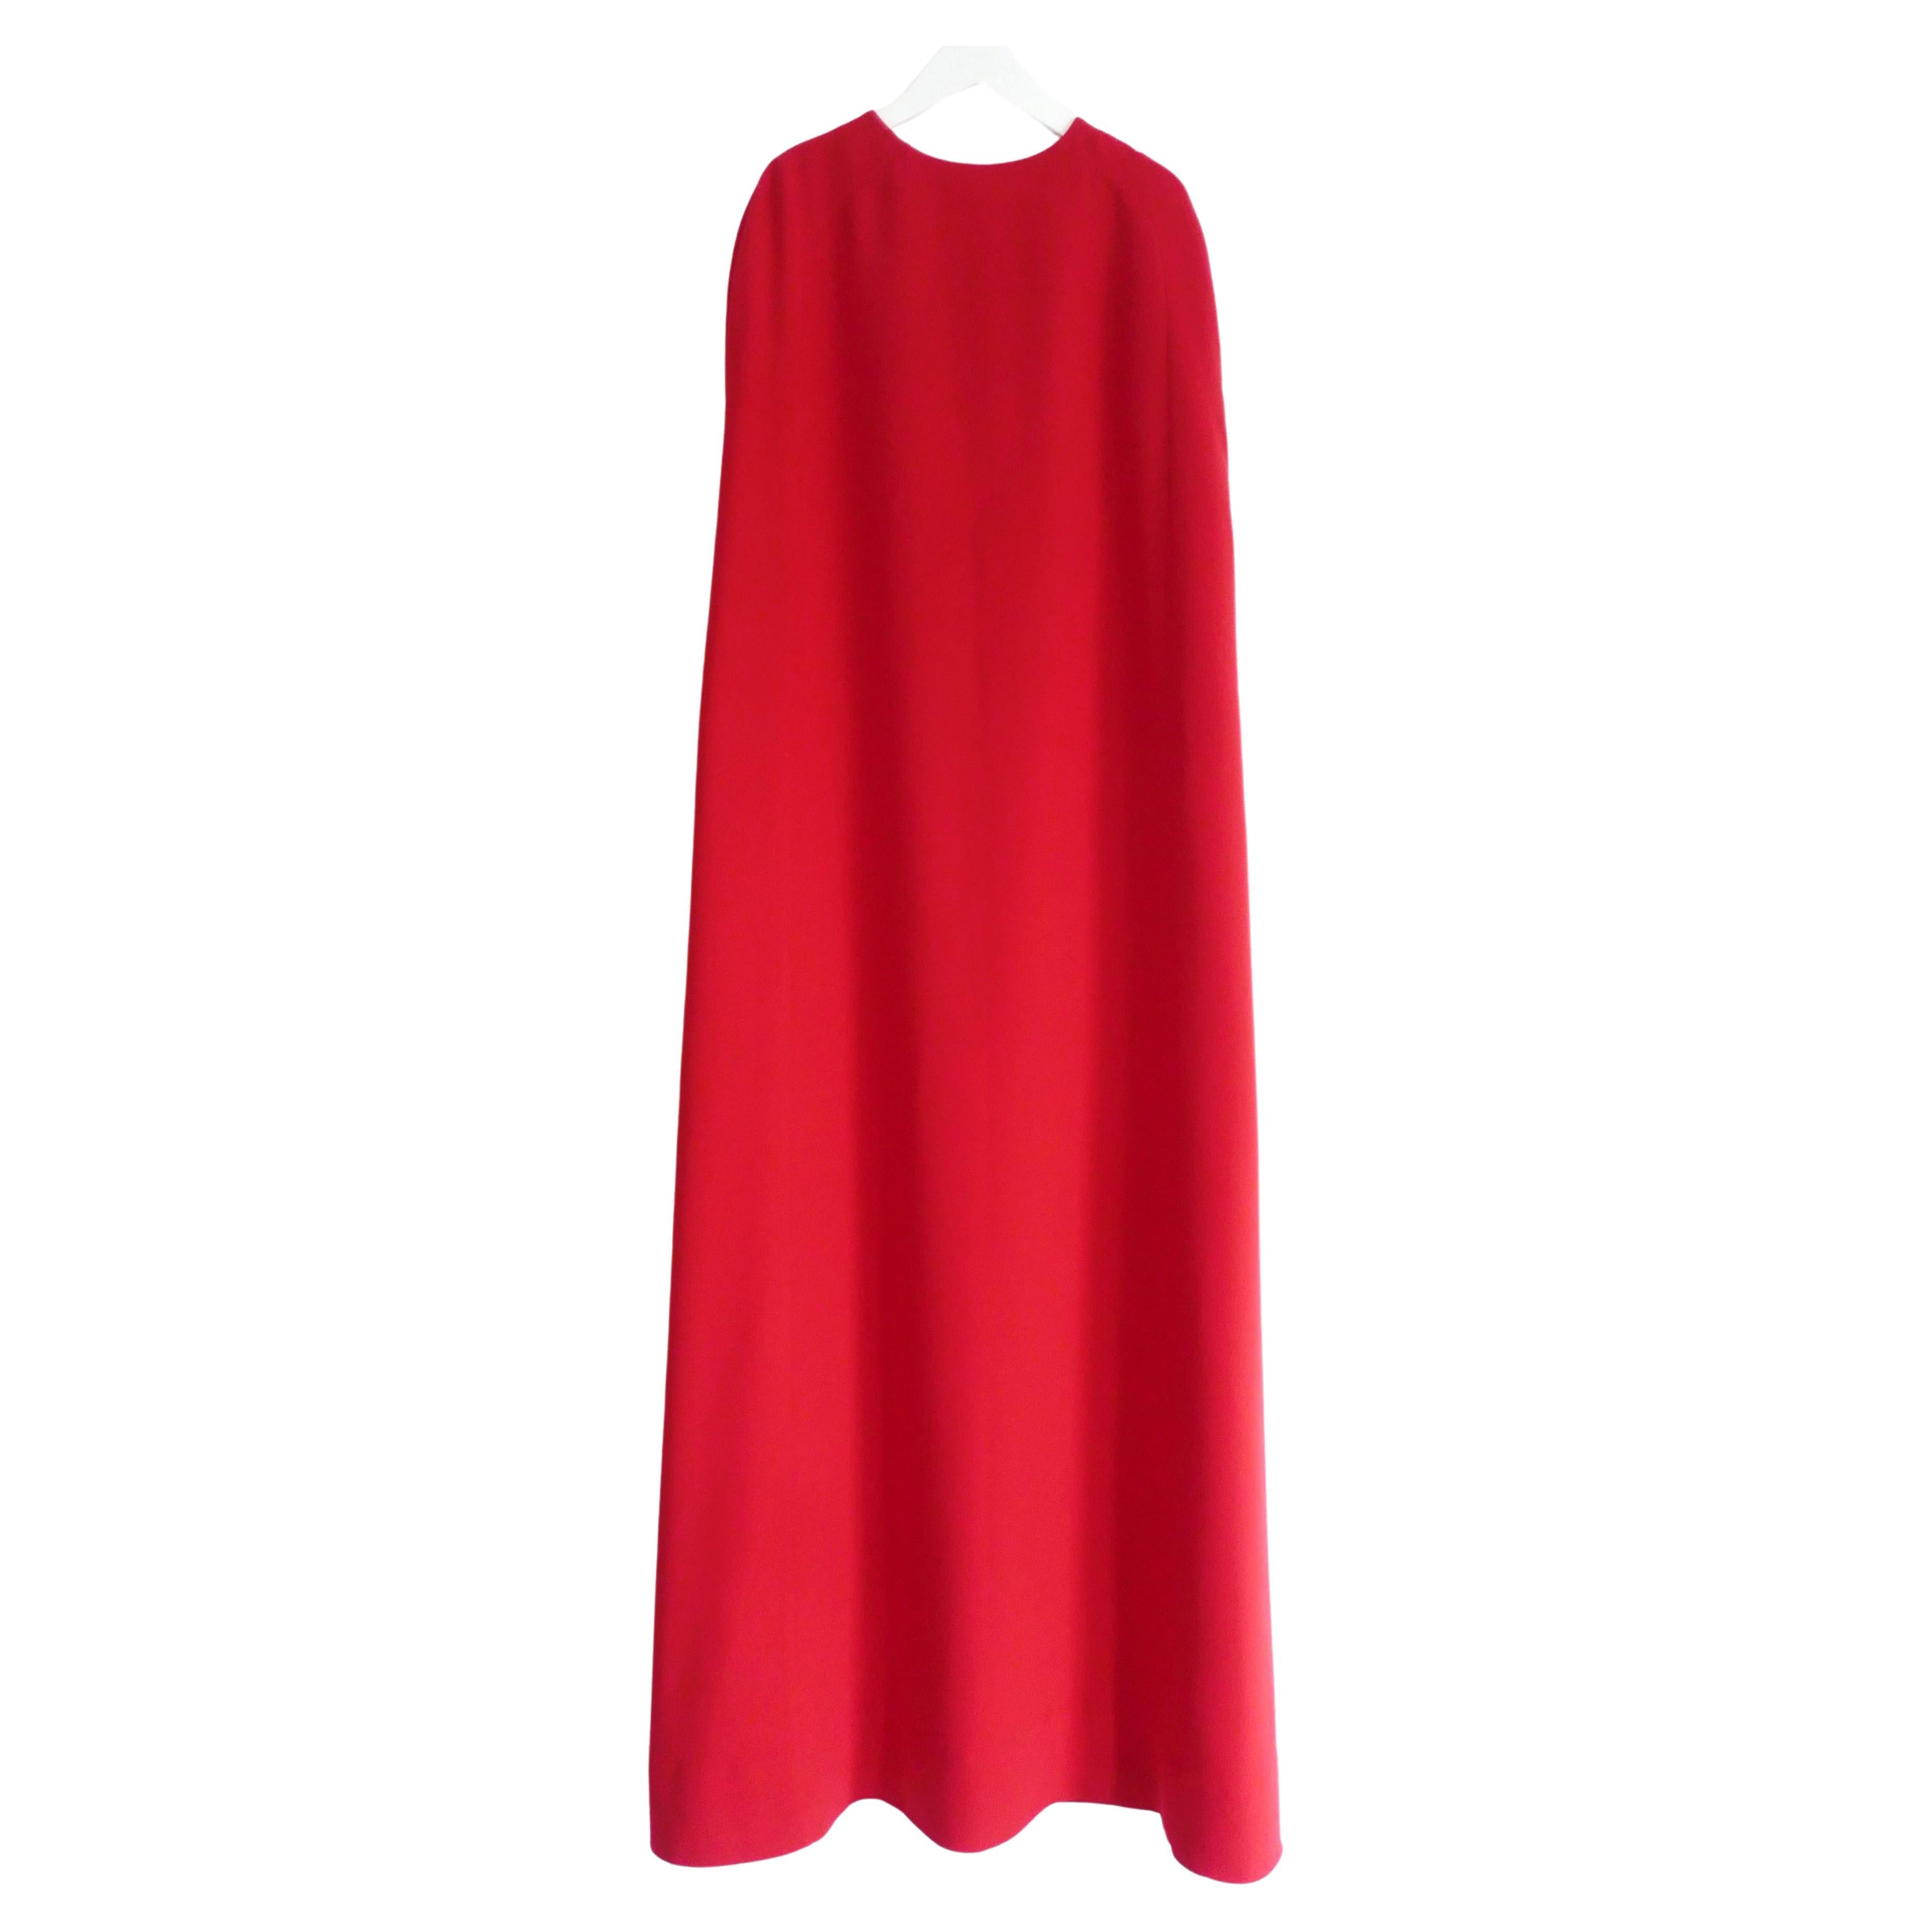  Valentino Pre-Fall 2014 Red Cape Gown Dress For Sale